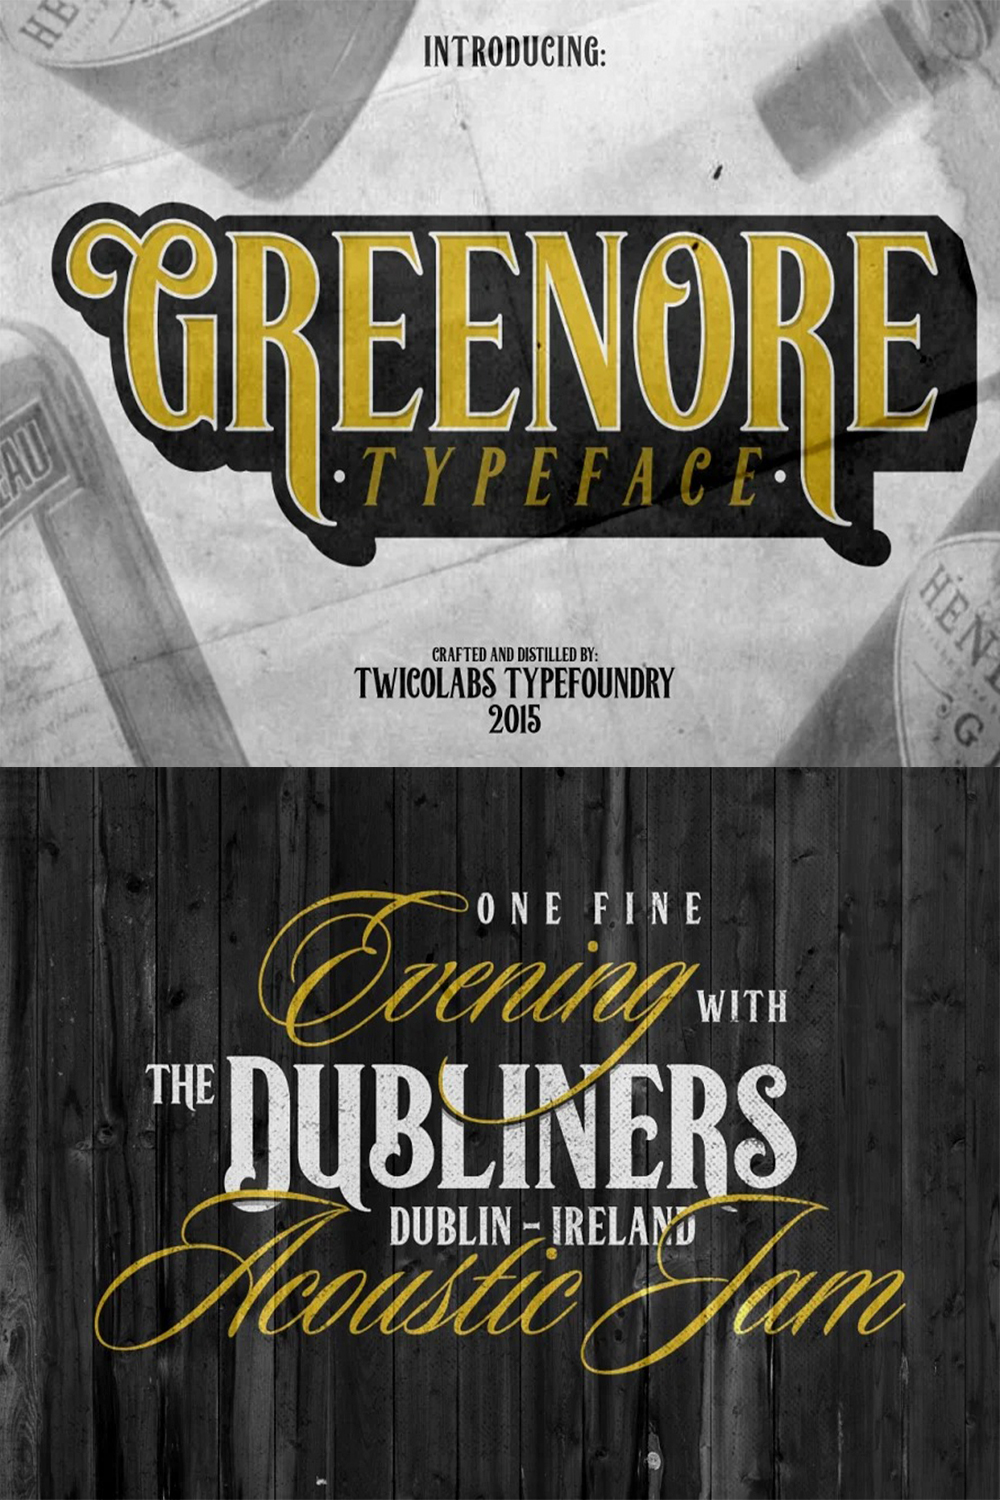 Images with text showcasing the amazing Greenore typeface.